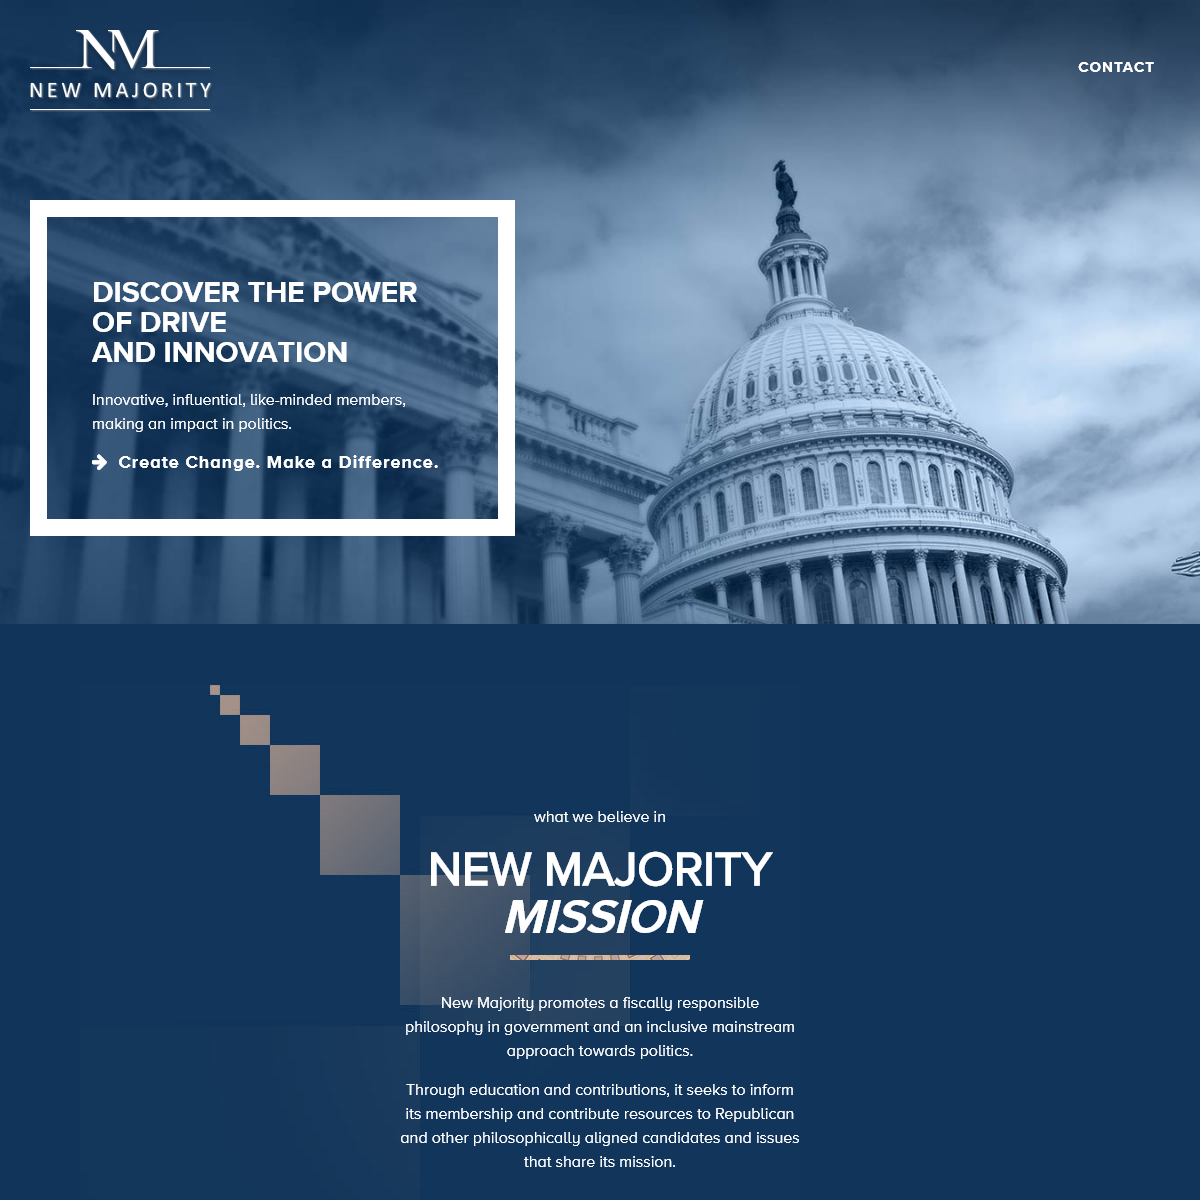 A complete backup of newmajority.com